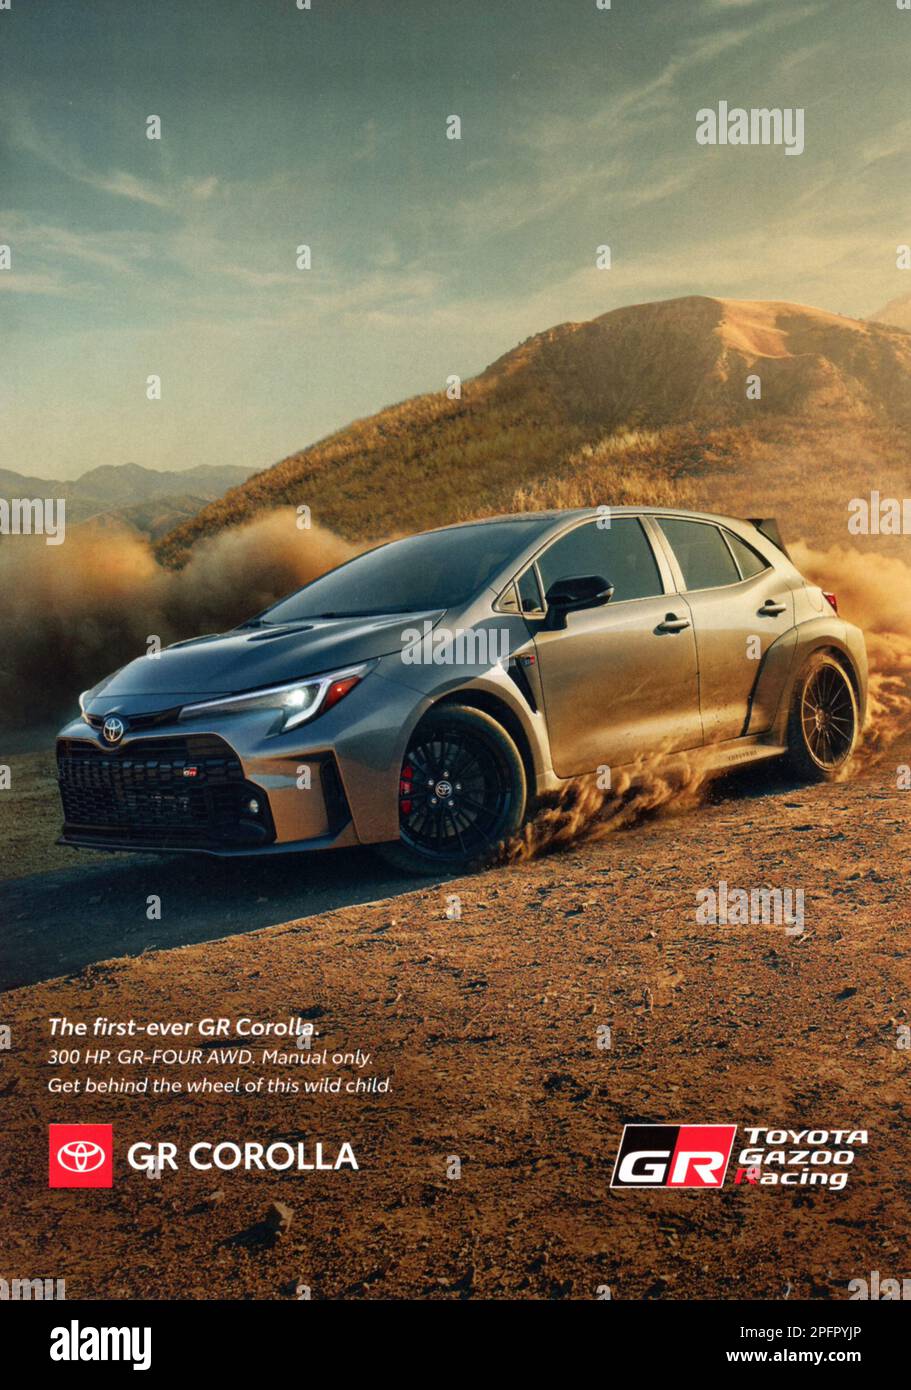 'Car and Driver' January 2023 Magazine Issue Advert, USA Stock Photo